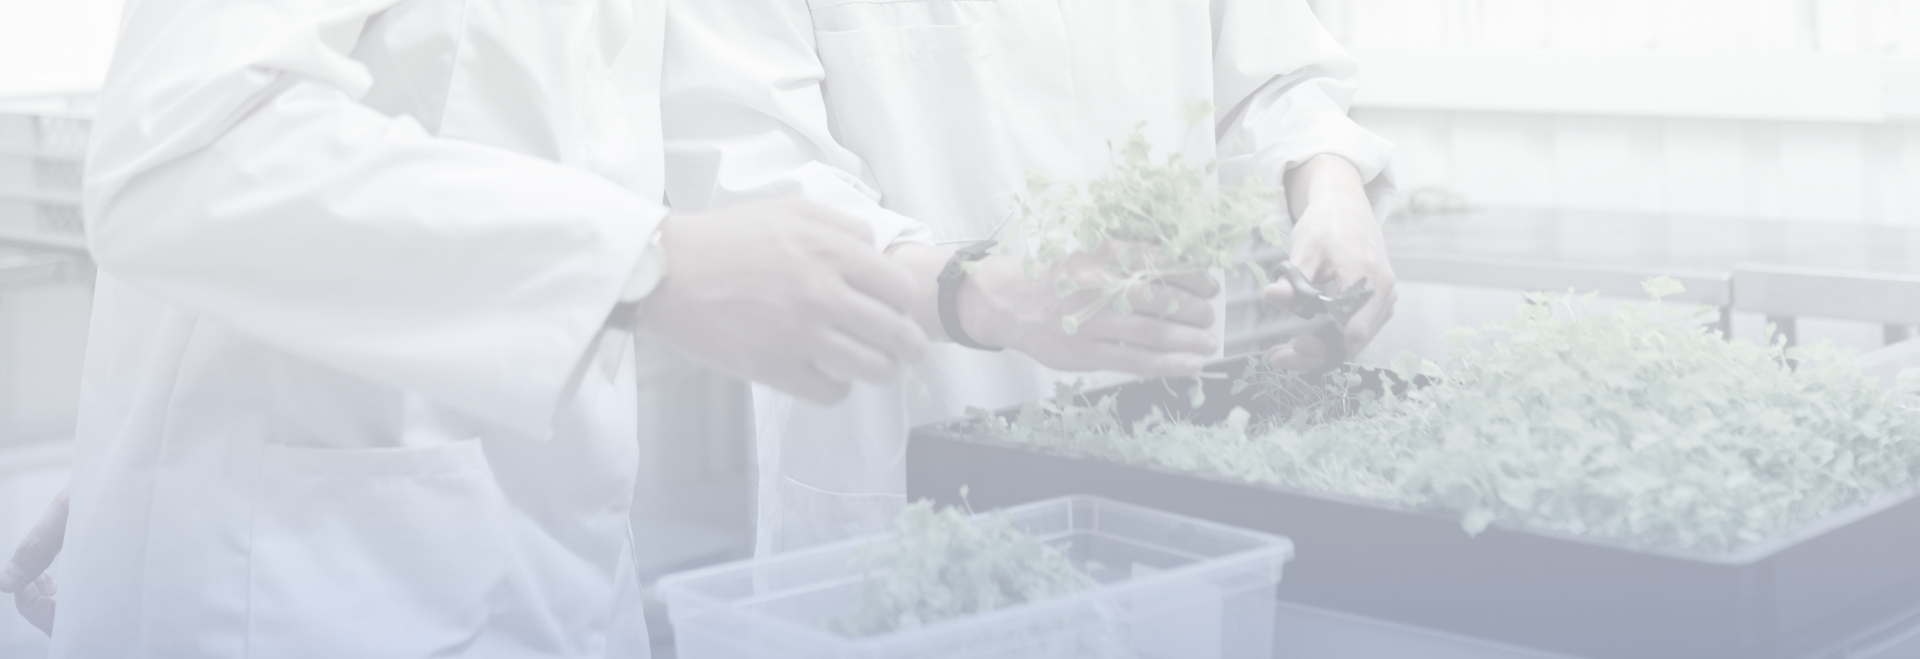 Background image of two scientists clipping a plant